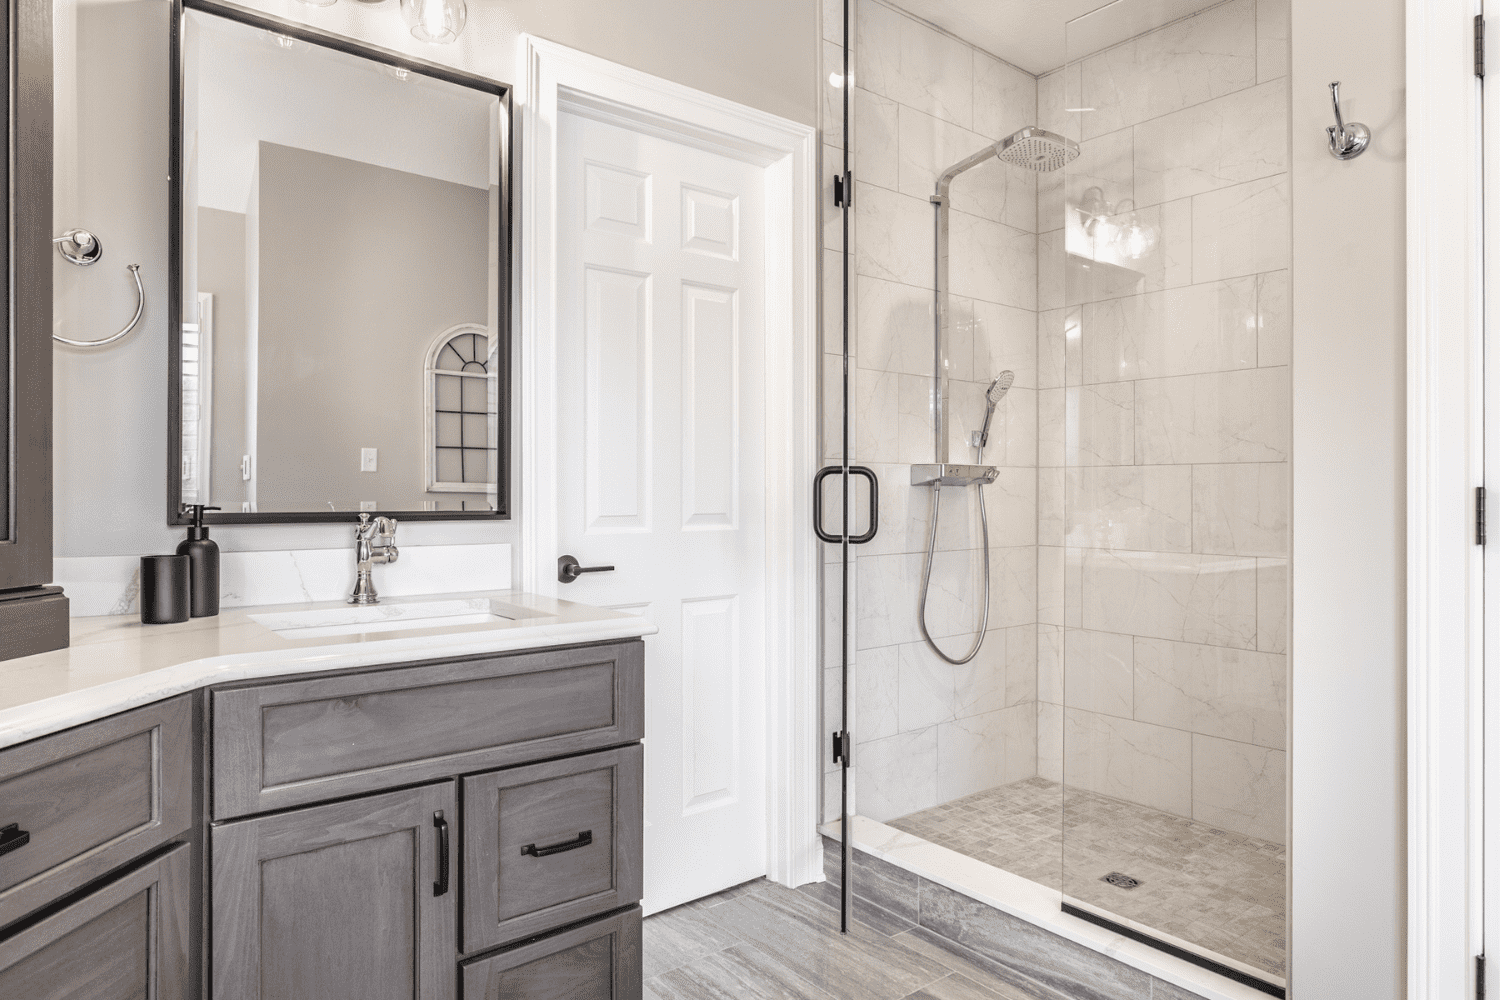 Nicholas Design Build |         Description: A master bathroom remodel featuring gray cabinets and a shower stall.